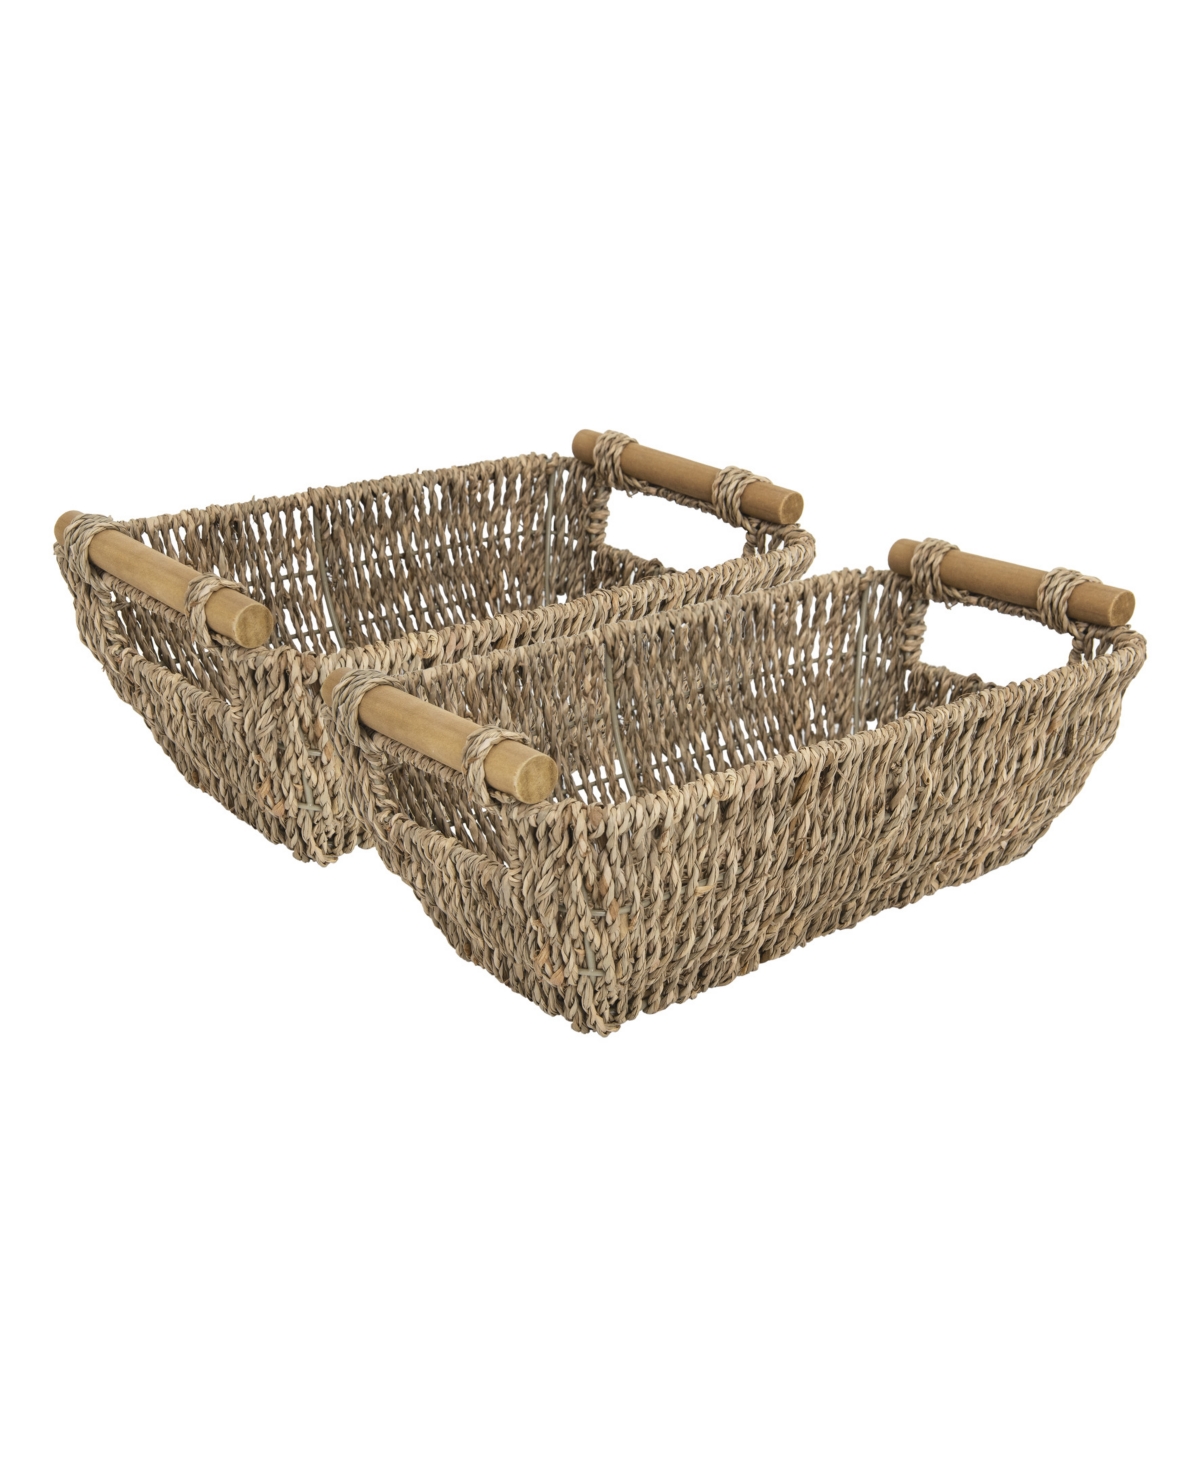 Wethinkstorage Set Of 2 6.5-liter Capacity Hand-woven Seagrass Basket In Natural